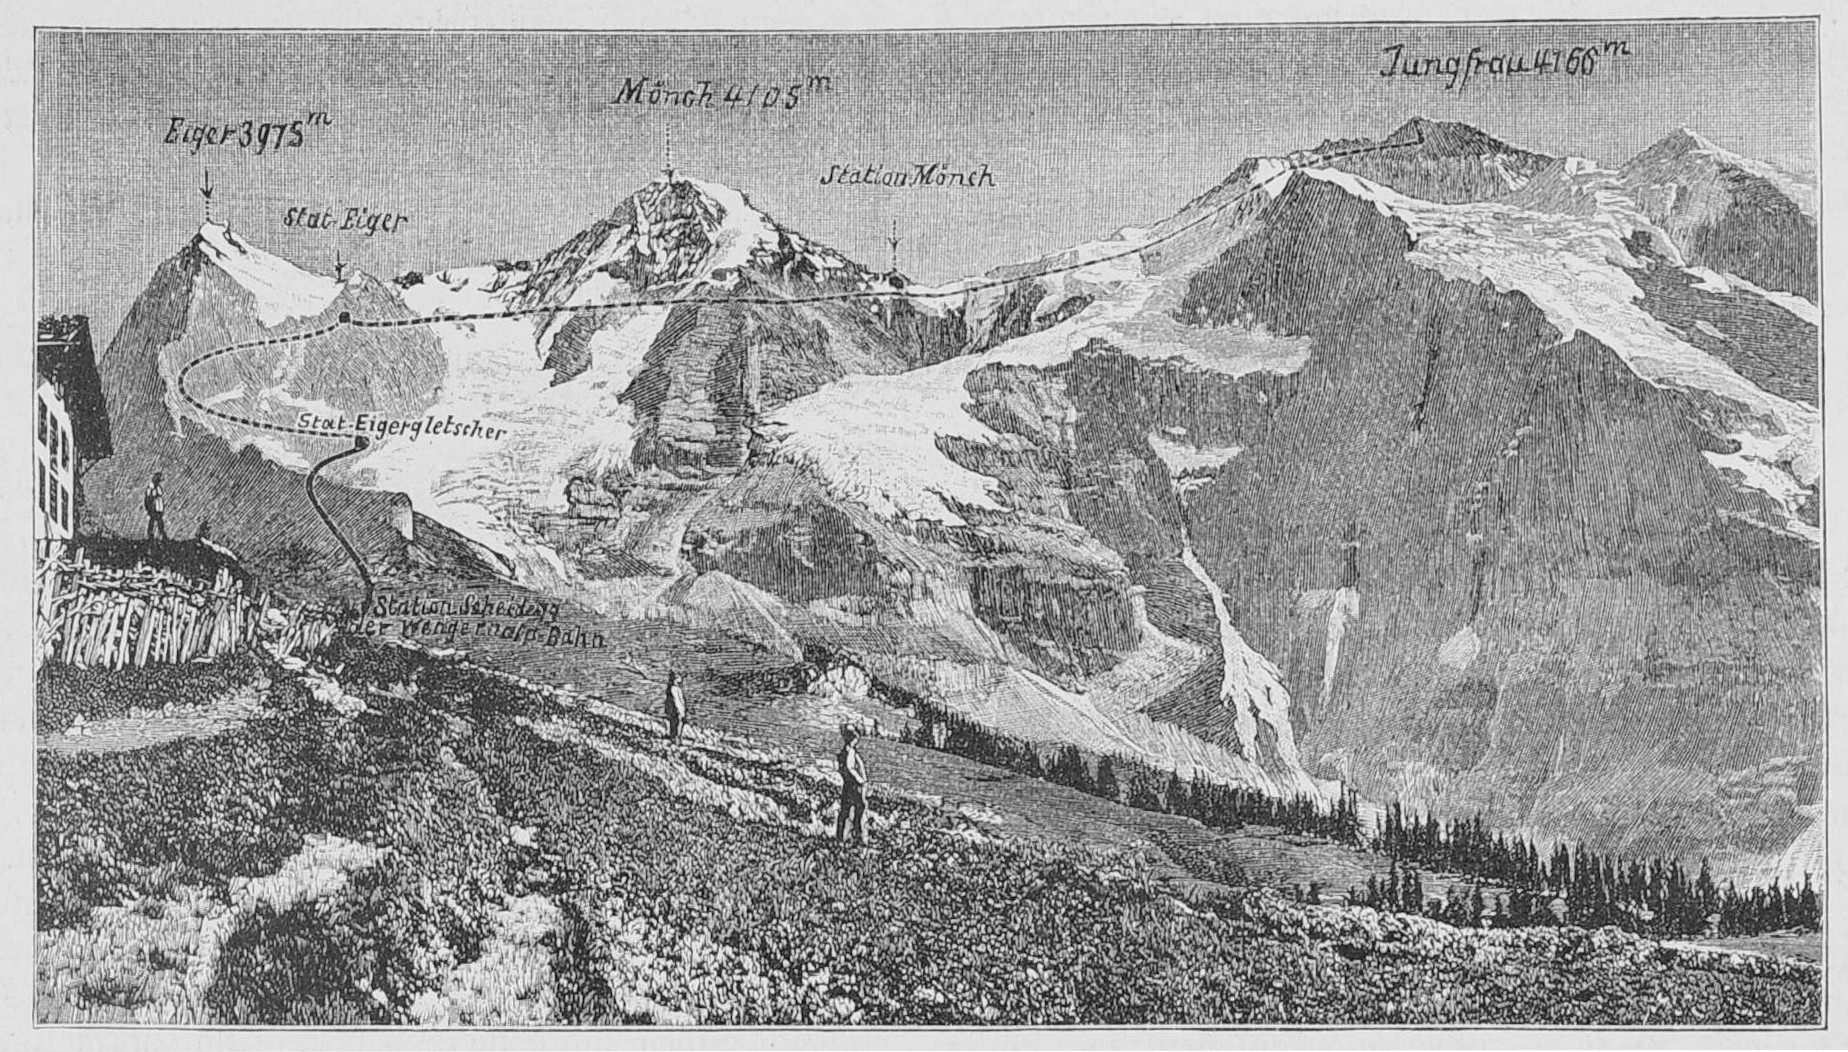 Enlarged view: Old black and white picture of the mountains showing the planned construction project